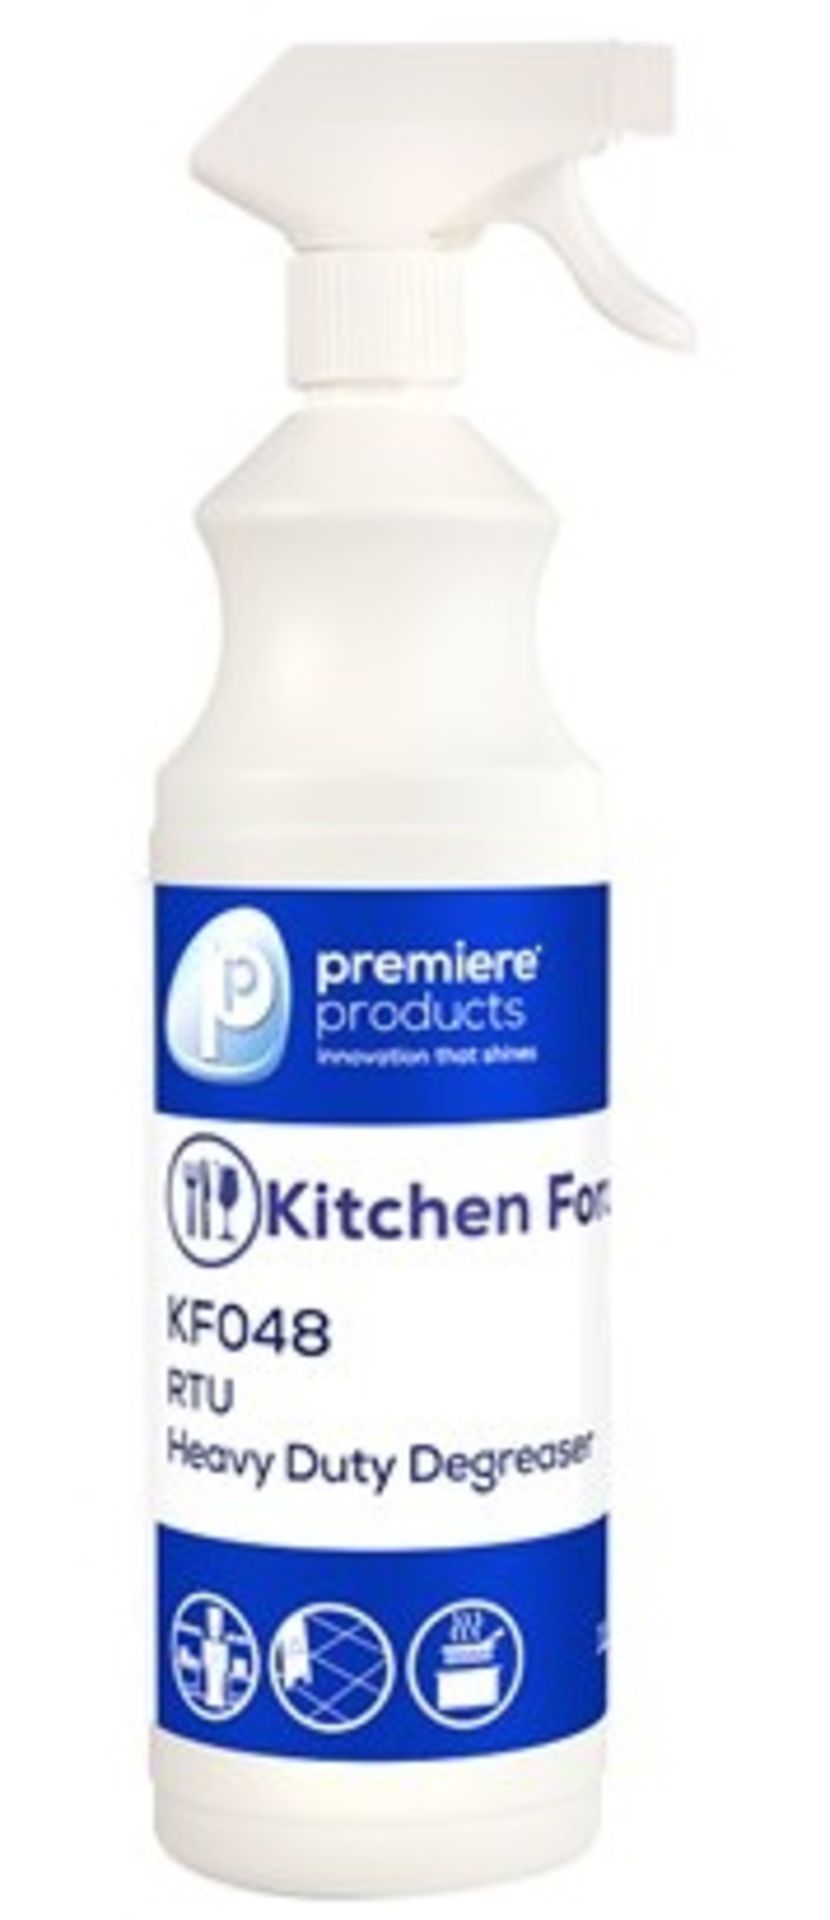 48 x Kitchen Force 1 Litre Ready to Use Heavy Duty Sanitising Degreaser - Premiere Products - Includ